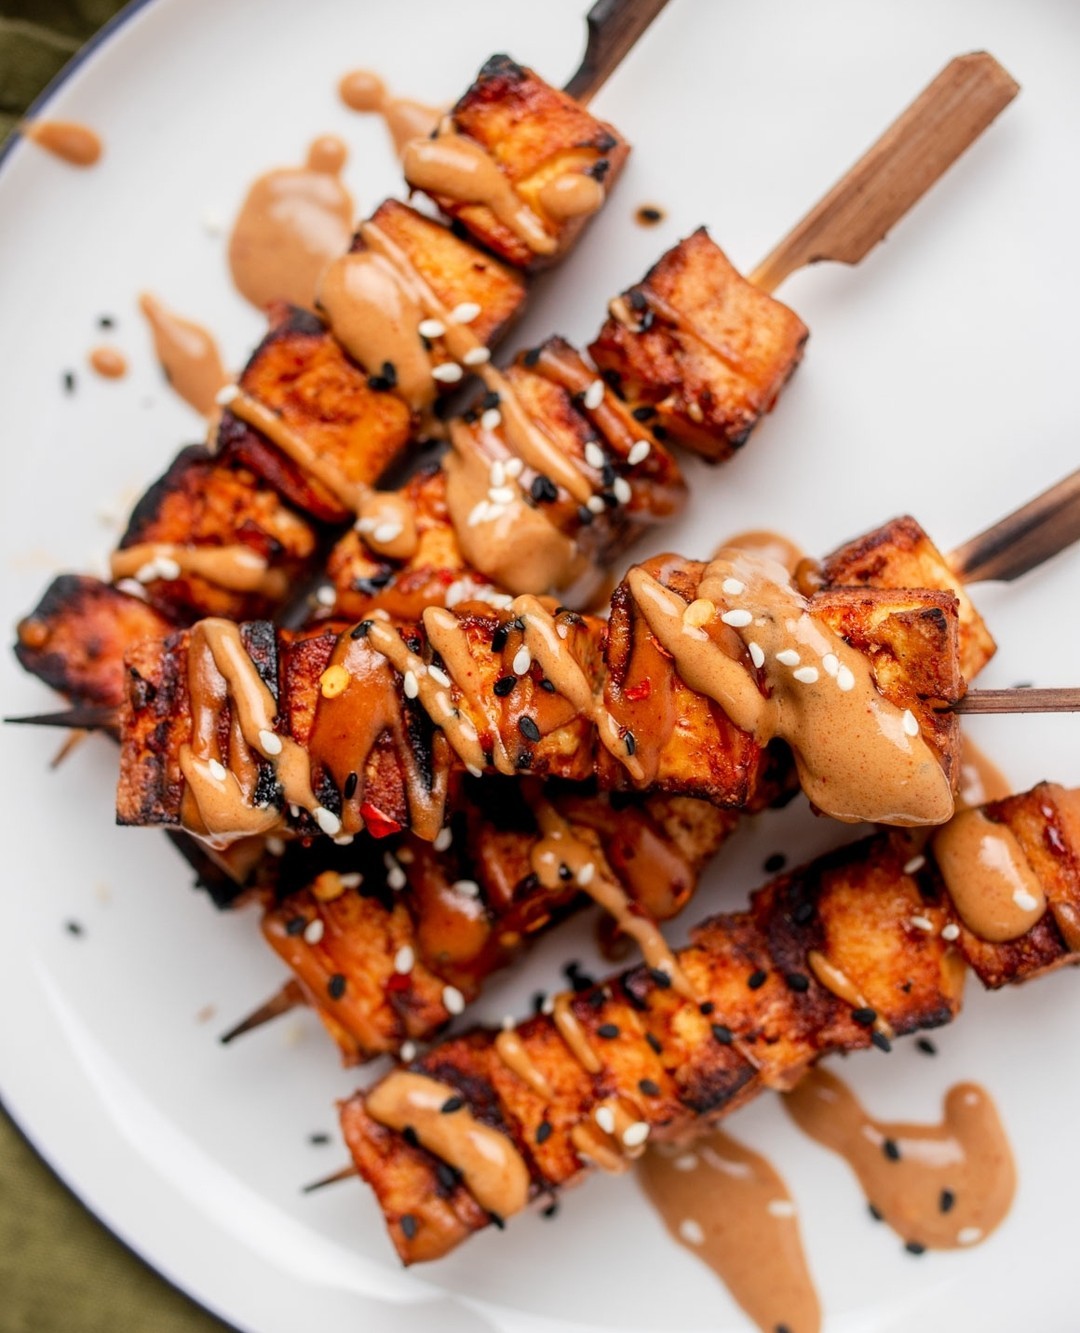 A quick and easy grill recipe that you can make in no time! Crispy Spicy Peanut Tofu Skewers, perfect for your long weekend grill party.⁠
⁠
Get the full recipe at LINK IN BIO 👆️ or at www.twomarketgirls.com⁠
⁠